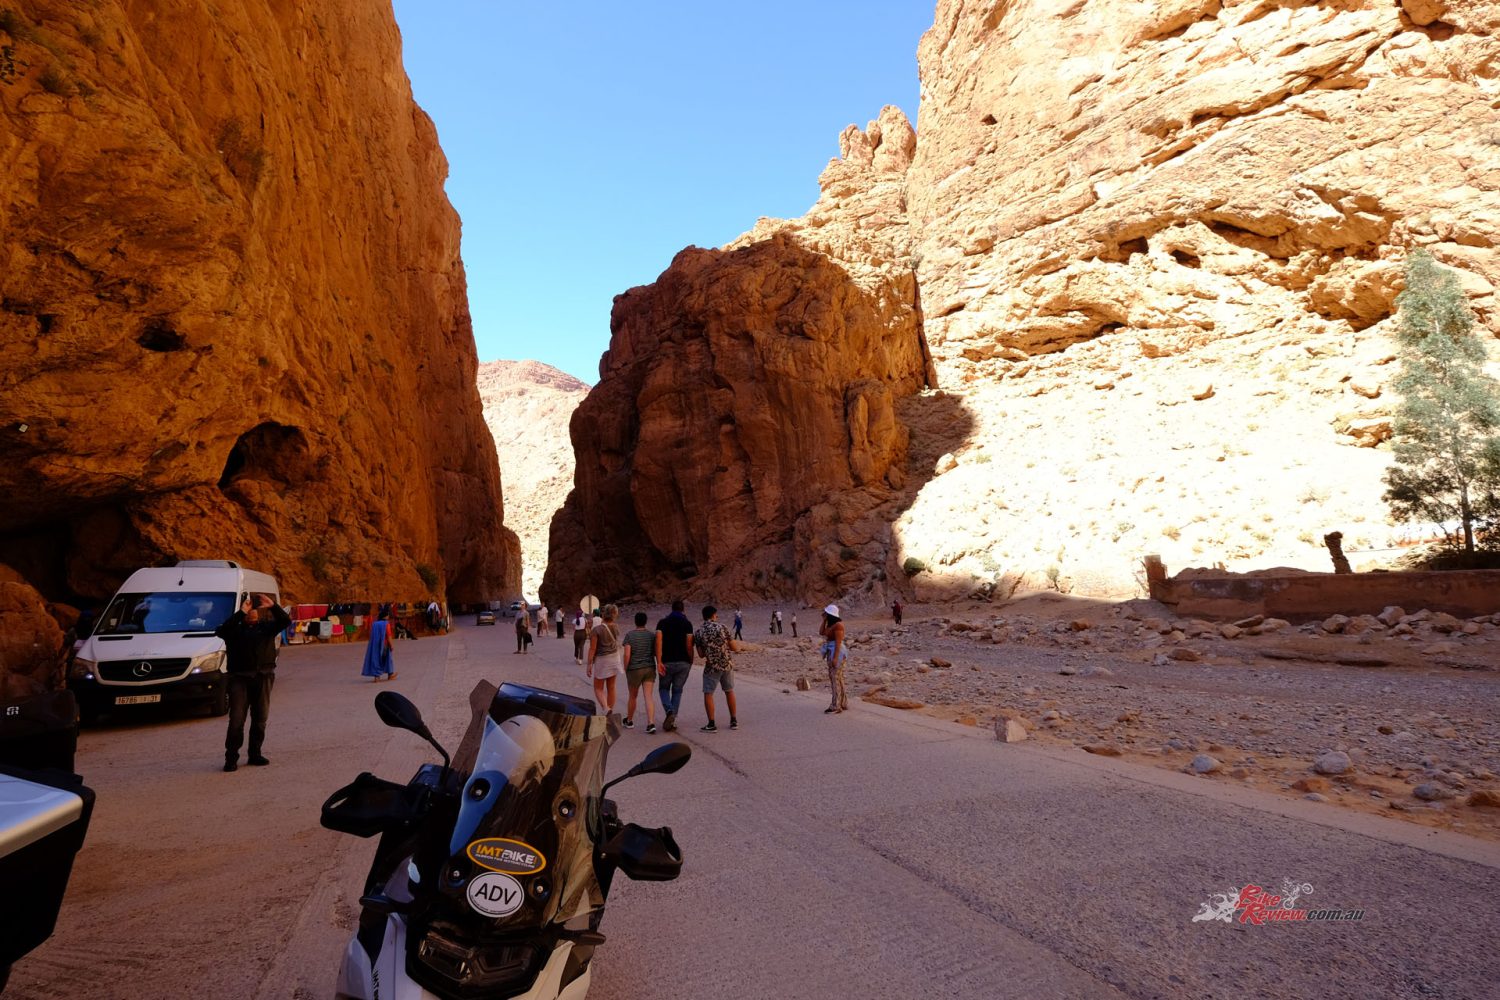 Inside the Todra Gorge. This is such a once in a lifetime experience you can't miss!